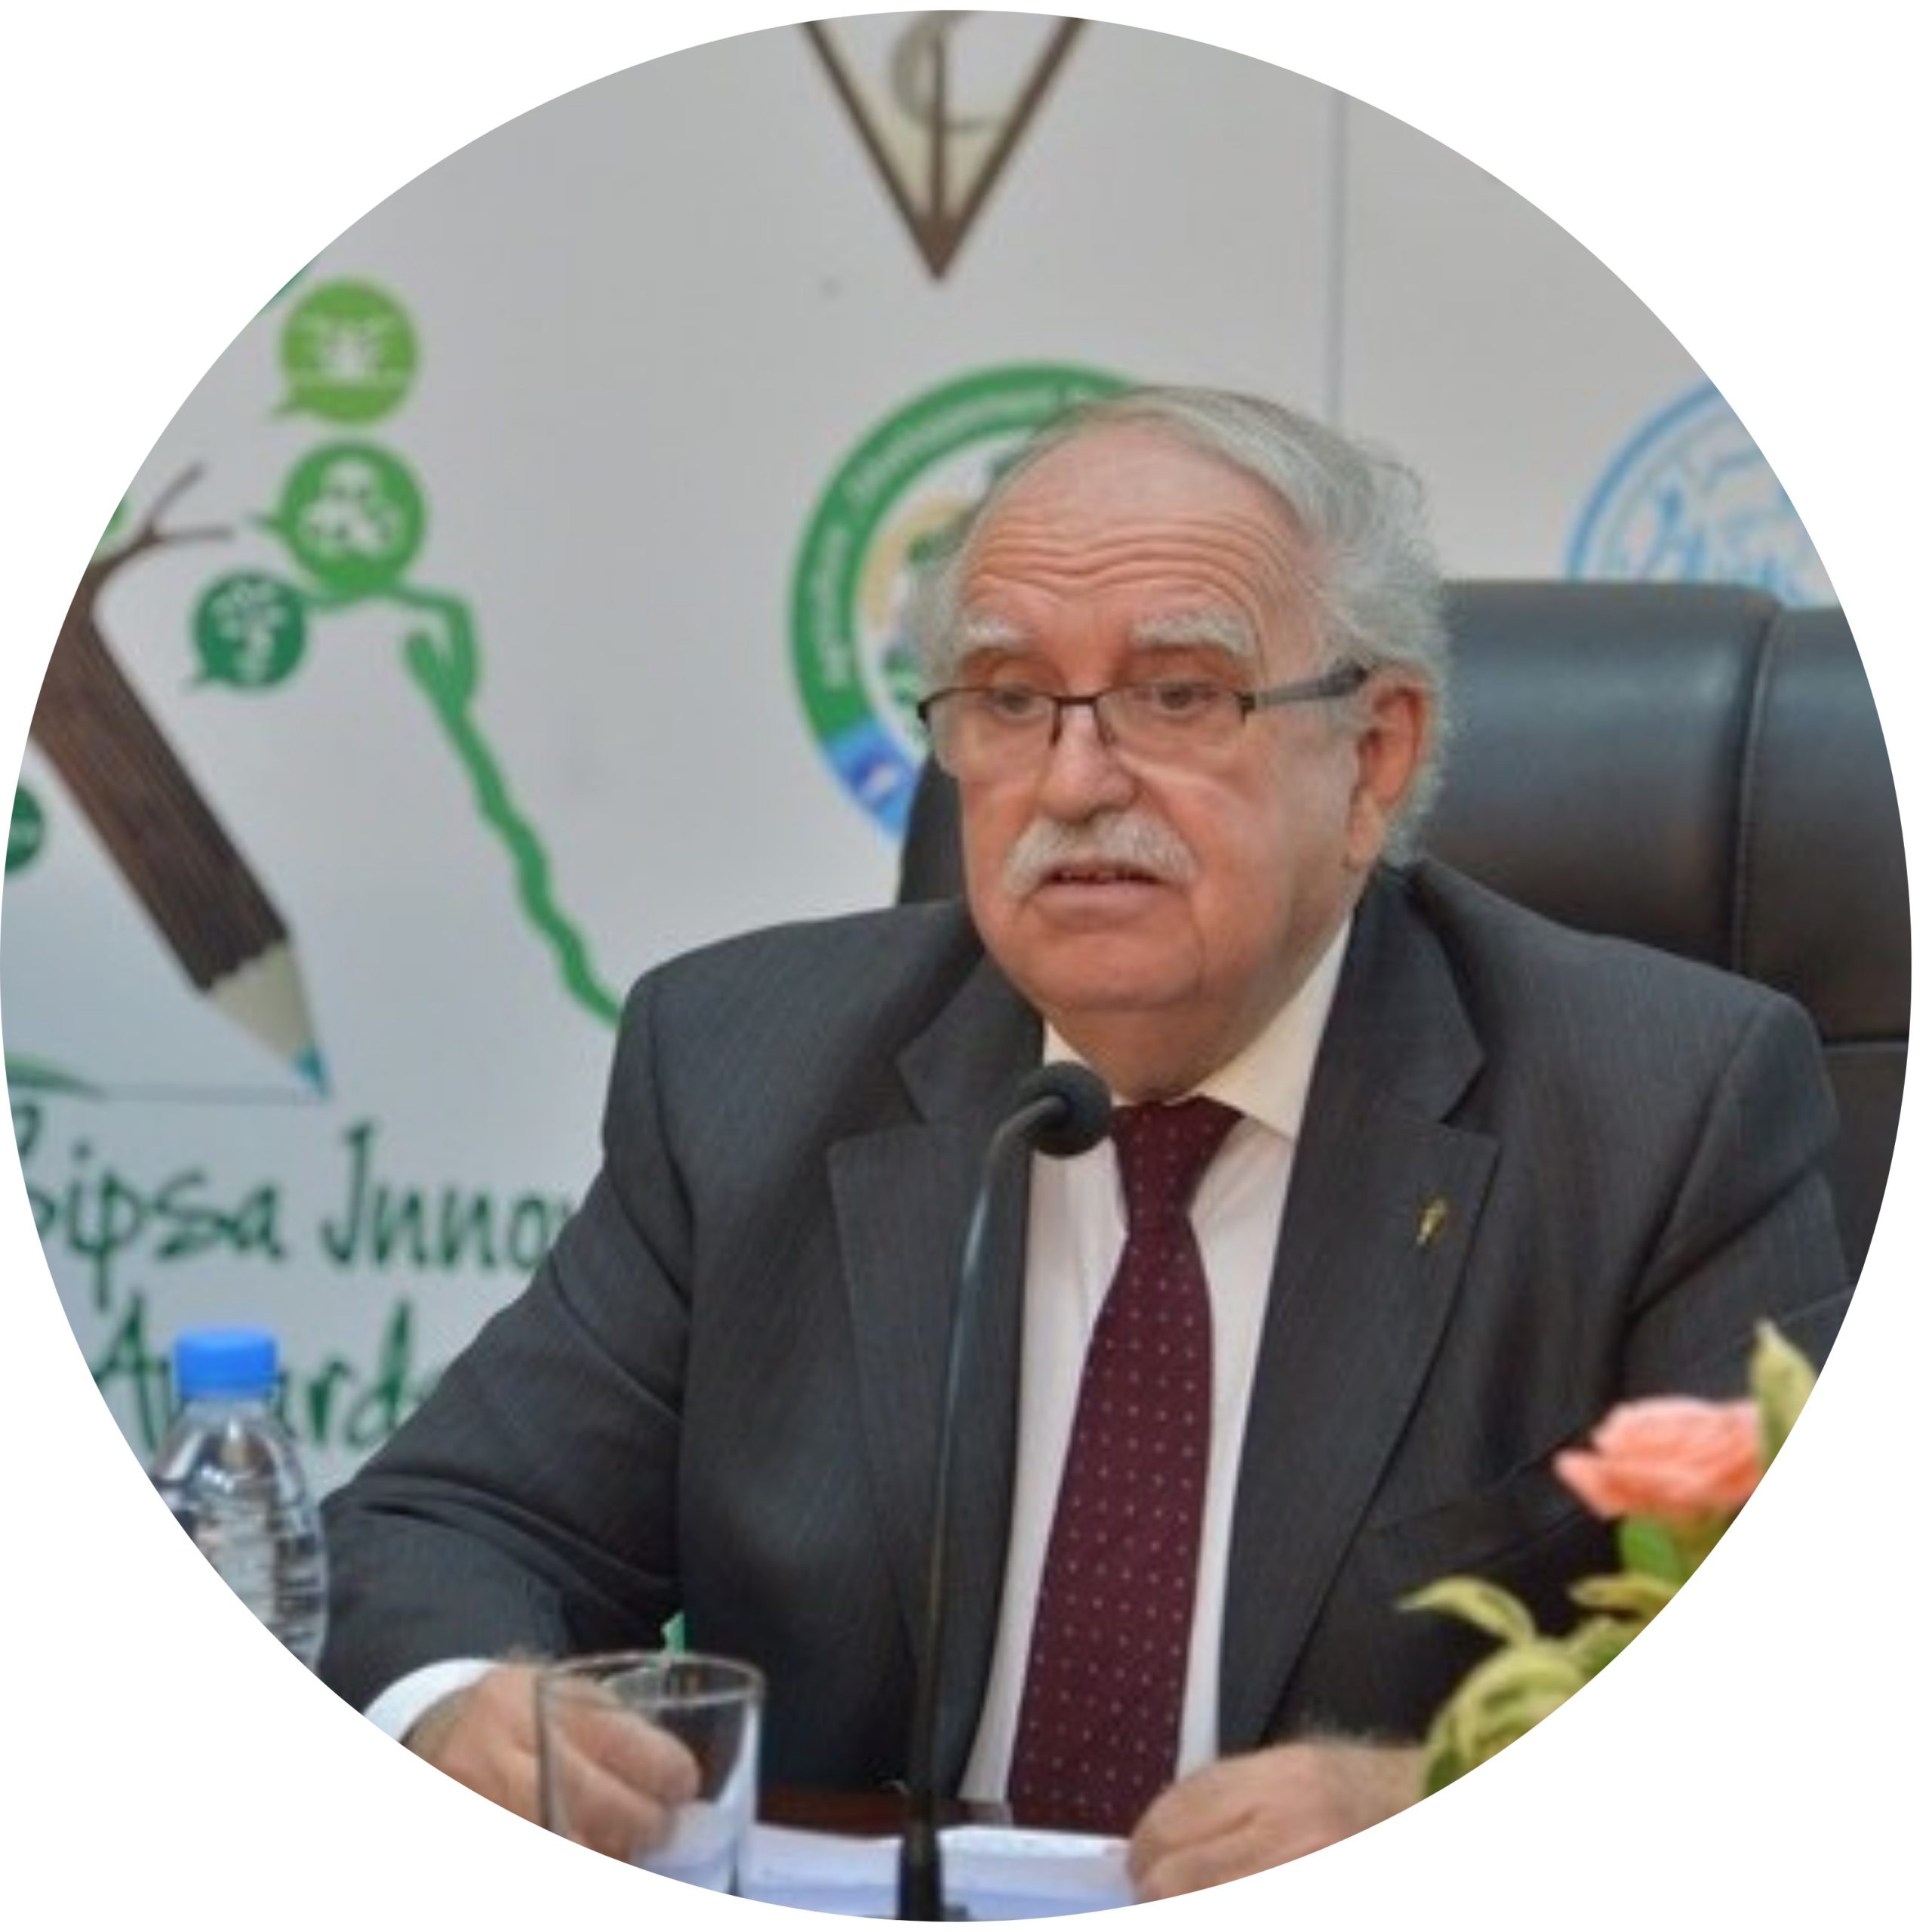 President of GRFI Filaha Innove (Algeria). GRFI objectives in view of the AfCFTA opportunities and for the strengthening of trade with African countries